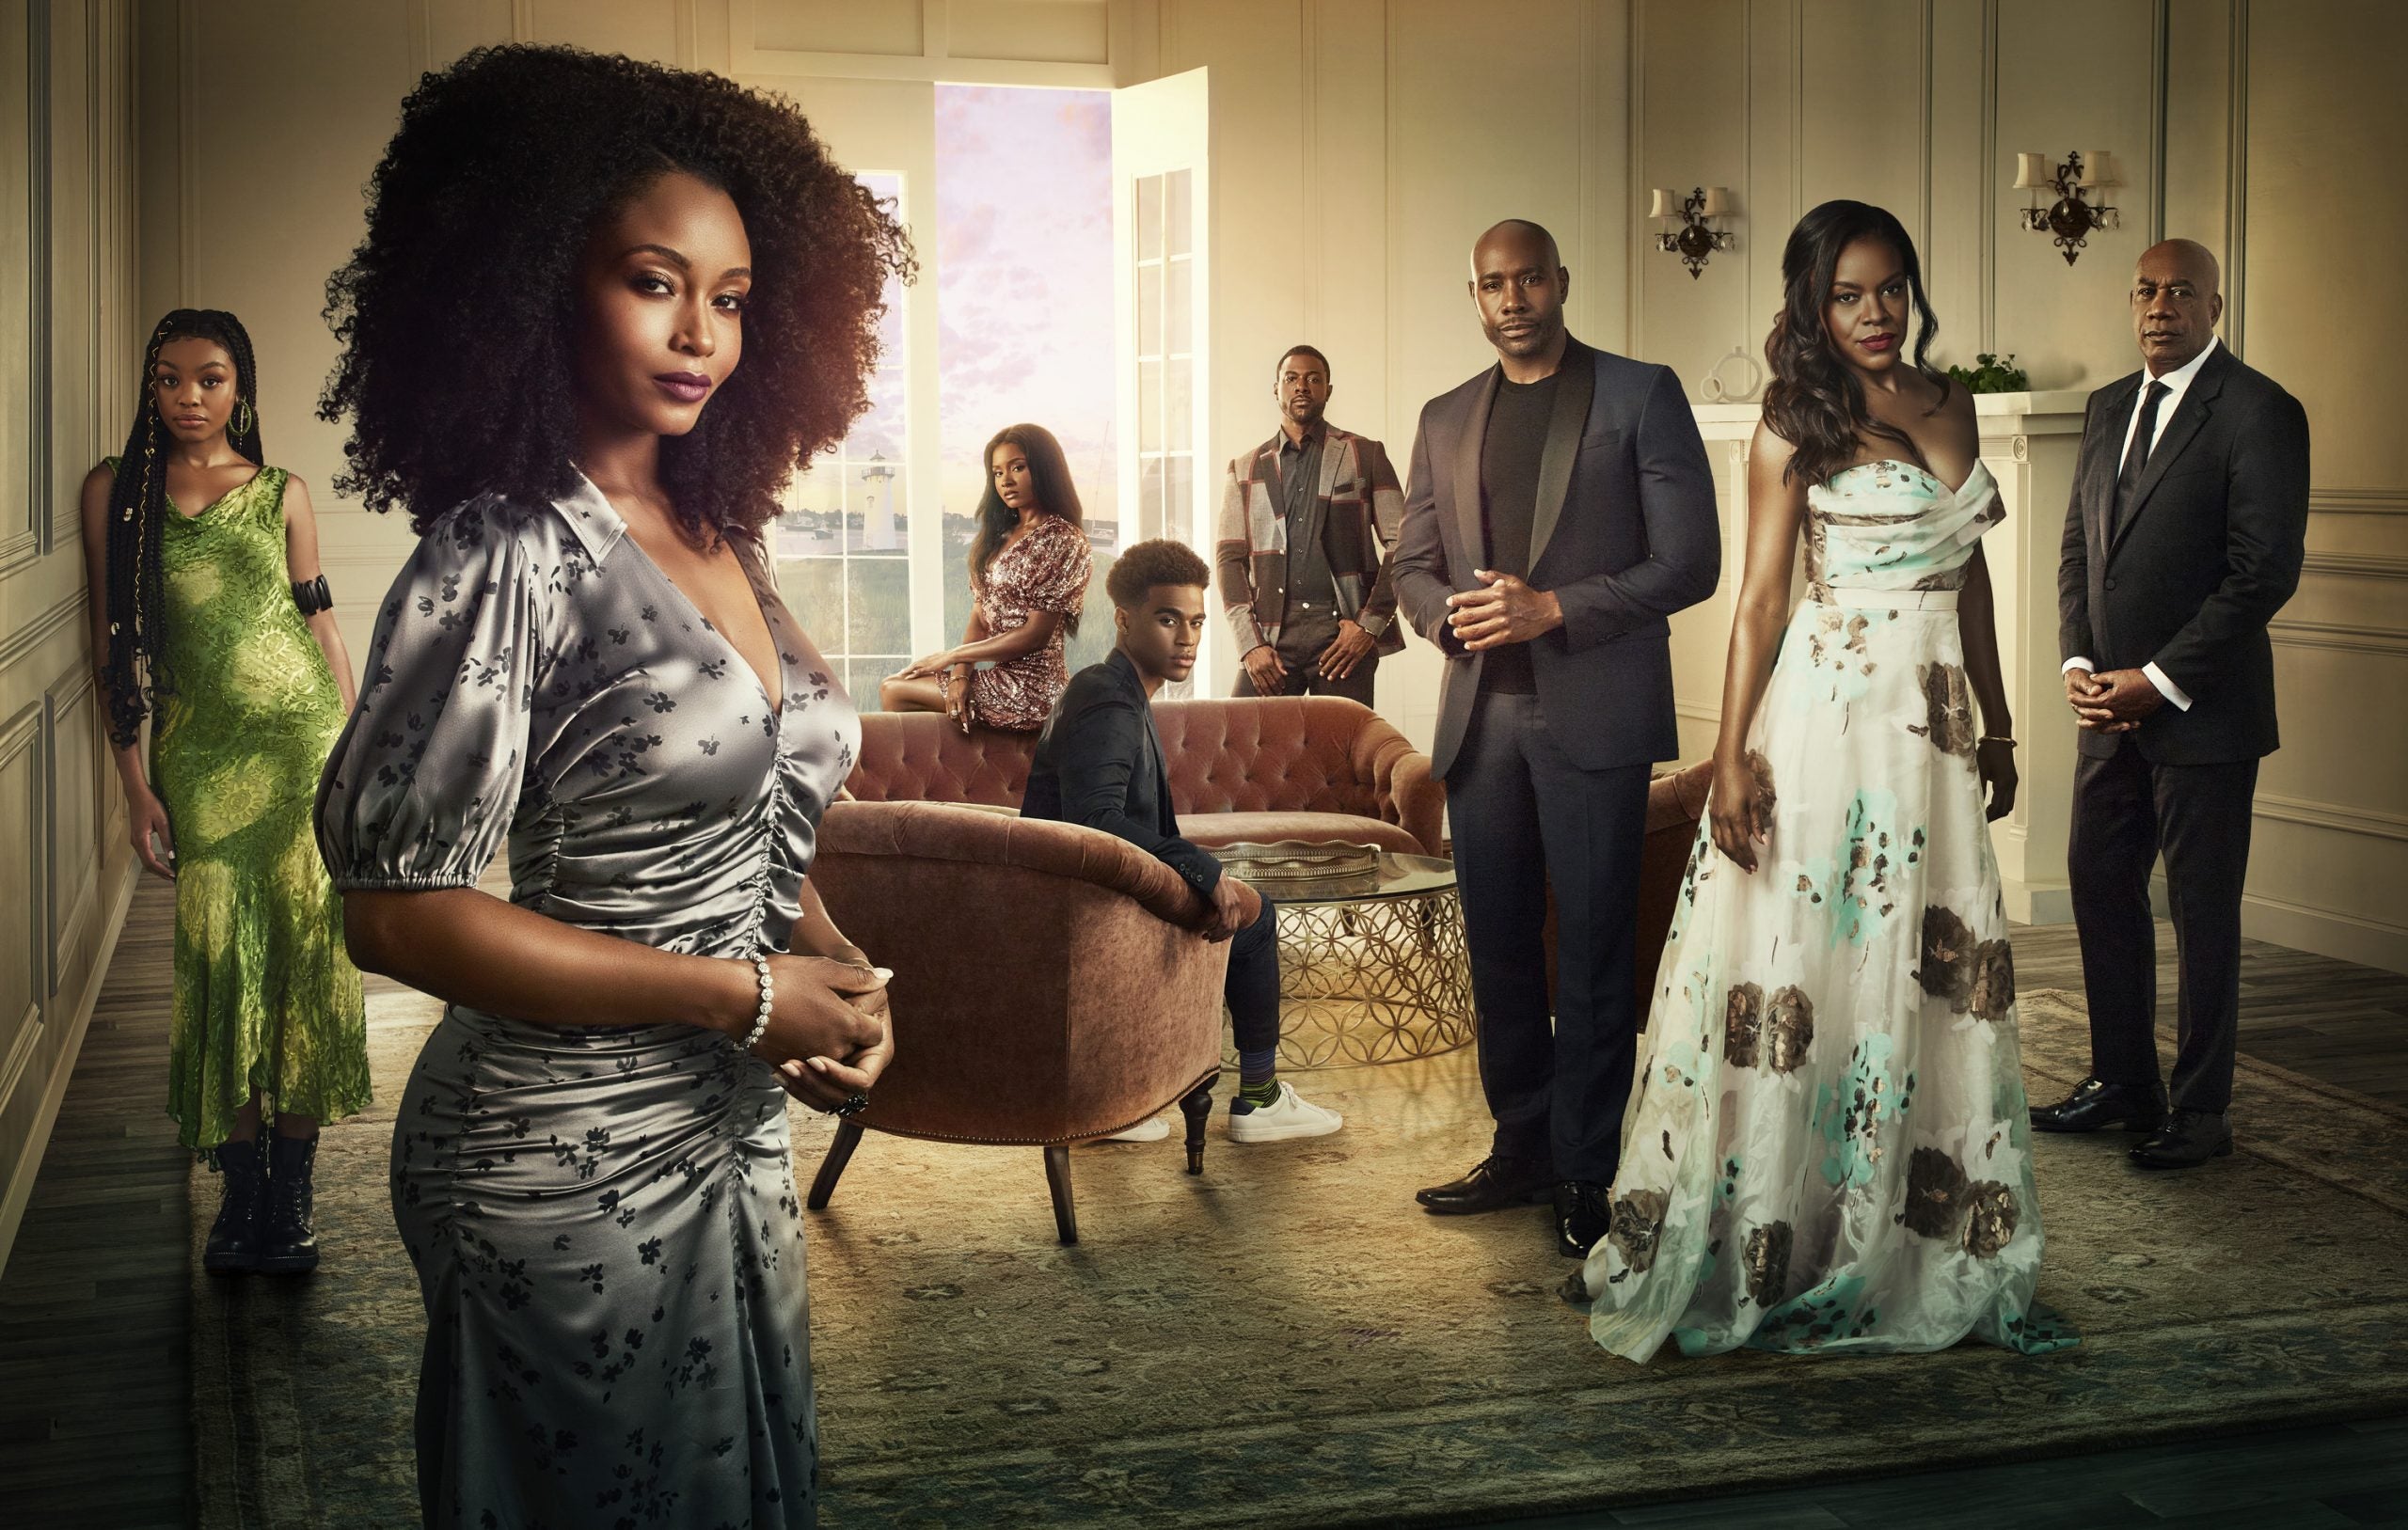 Exclusive: Get Your First Look At The Black Opulence In 'Our Kind Of People'